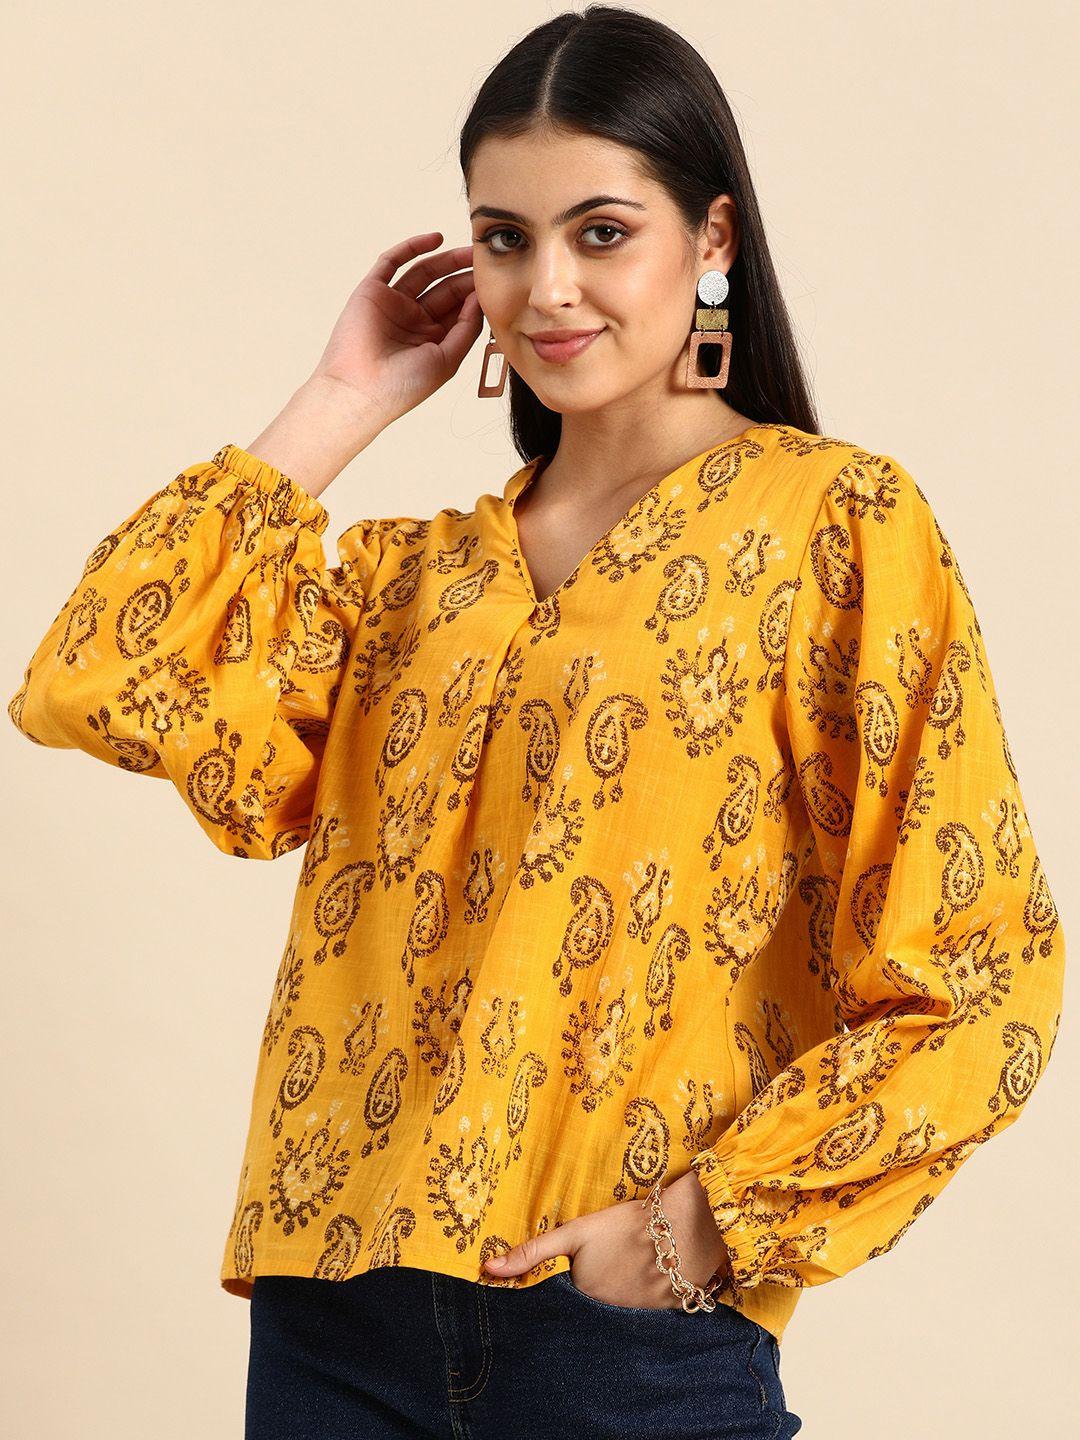 all-about-you-yellow-&-brown-ethnic-motif-print-pure-cotton-casual-a-line-top